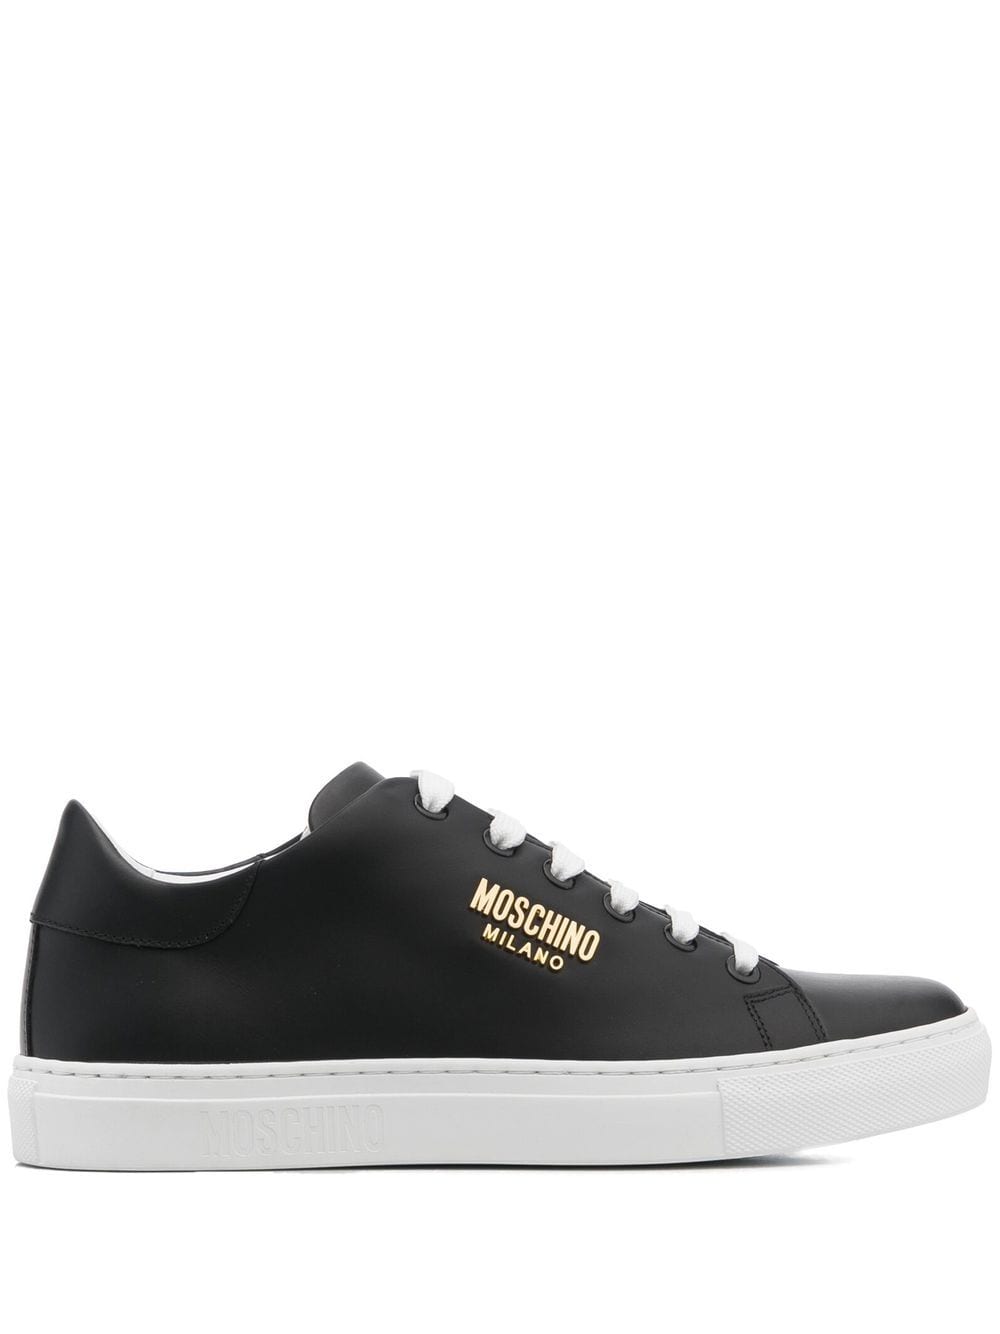 Image 1 of Moschino leather low-top sneakers